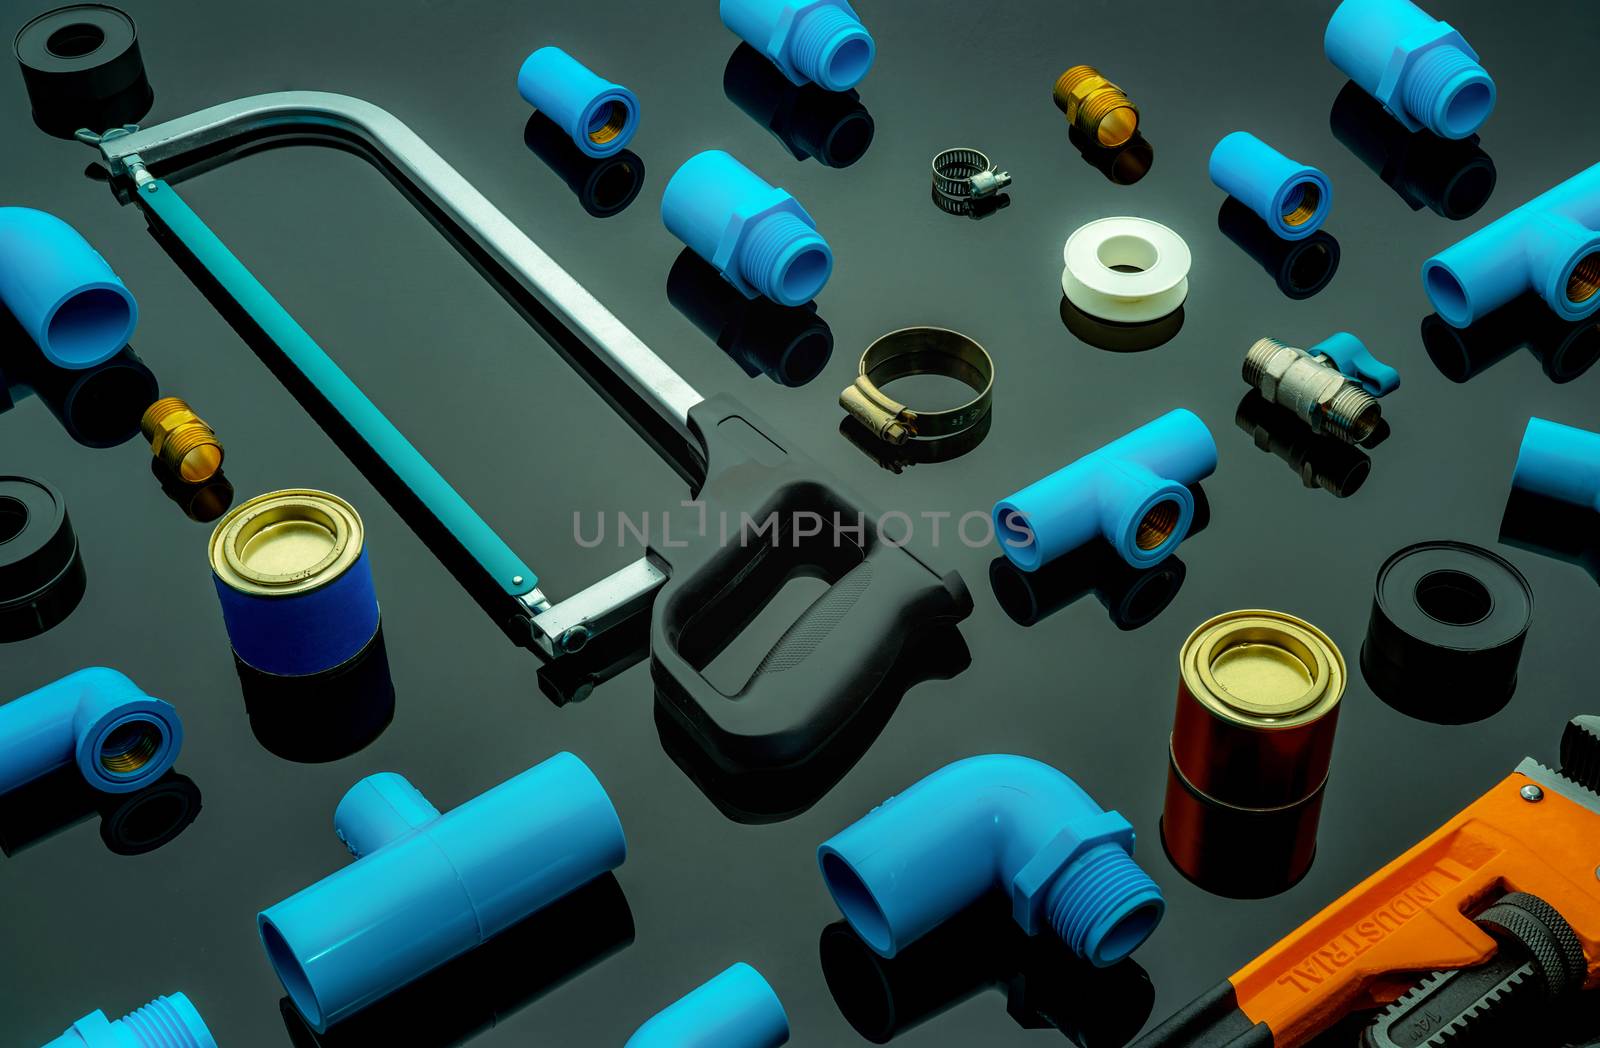 Plumbing tools. Plumber equipment. Blue PVC pipe fittings, hacksaw, glue can, and pipe wrench. House plumbing repair and maintenance service. DIY tools for plumbing work isolated on dark background. 